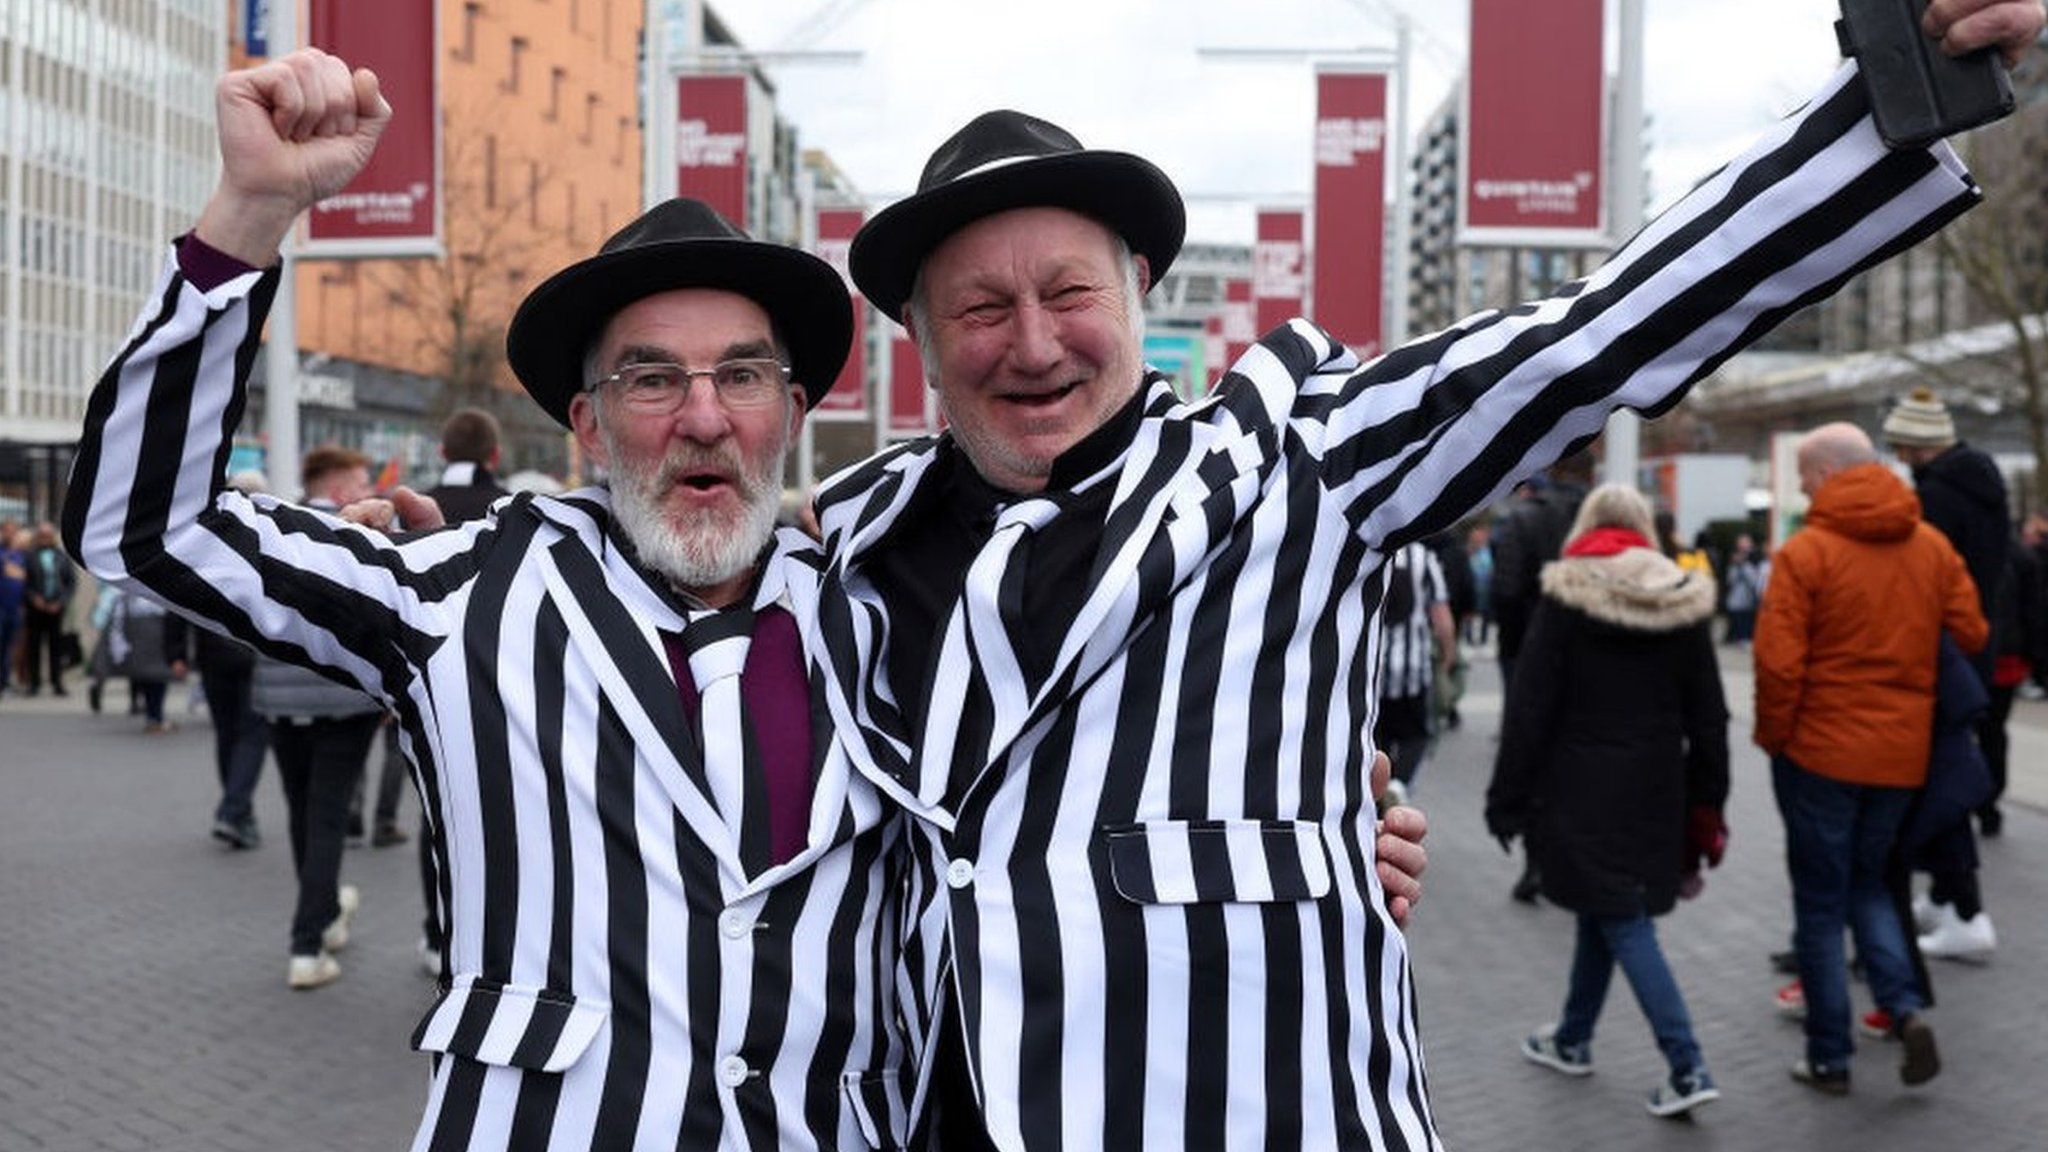 Newcastle United fans turned out in their numbers for their side's first appearance in a major cup final for more than 40 years